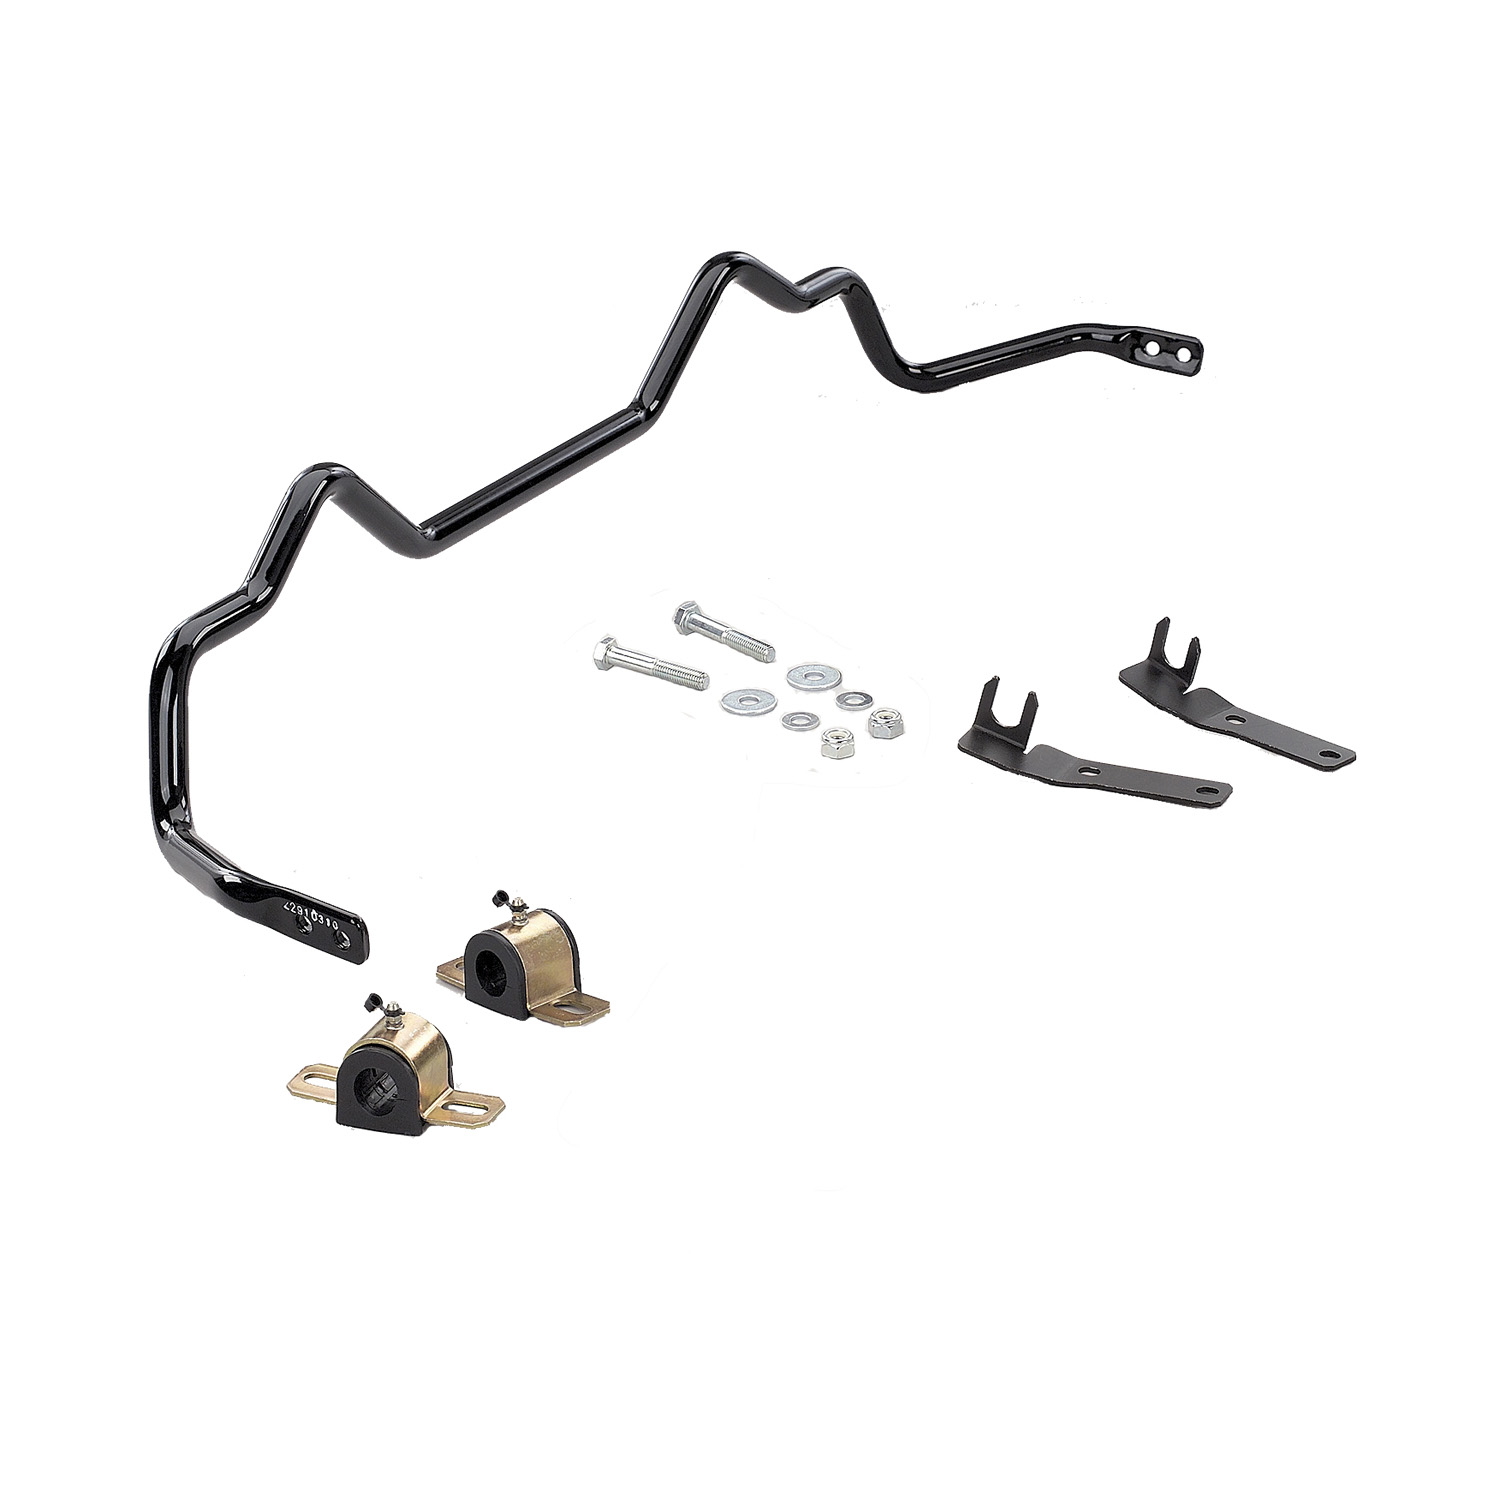 2003-2004 Audi RS6 Sport Rear Sway Bar from Hotchkis Sport Suspension